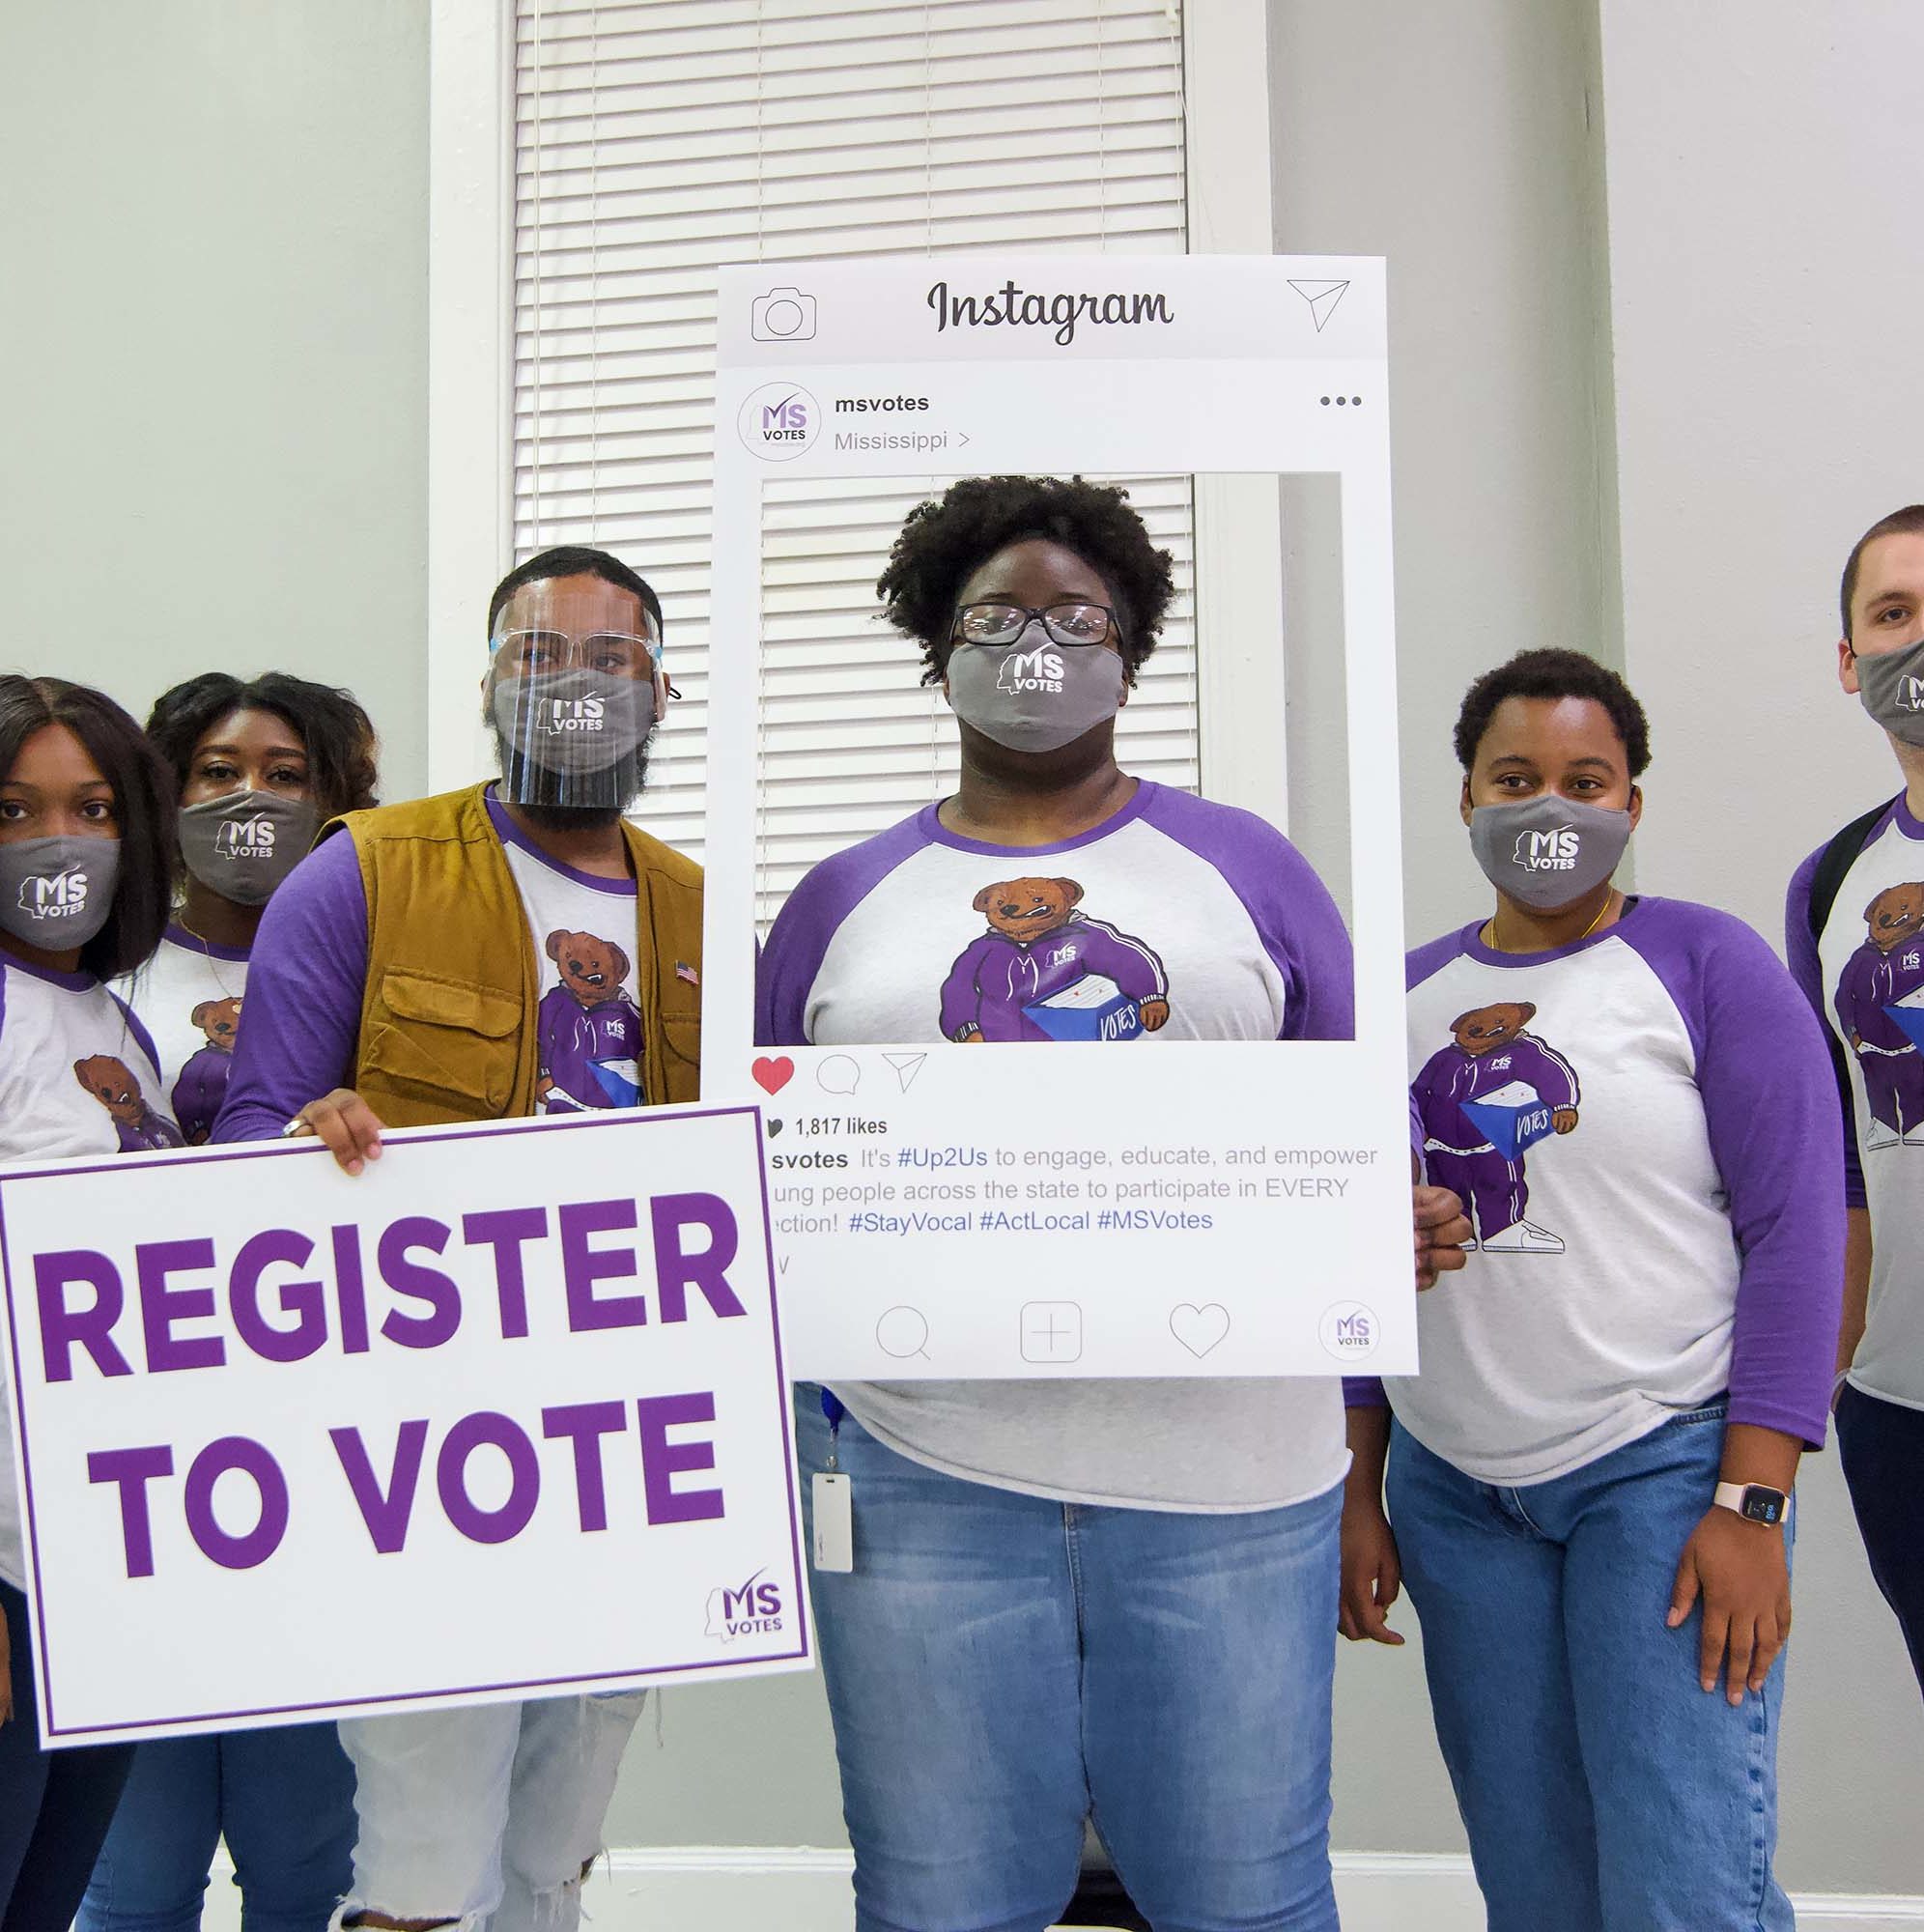 group of MS Votes holding up a register to vote sign